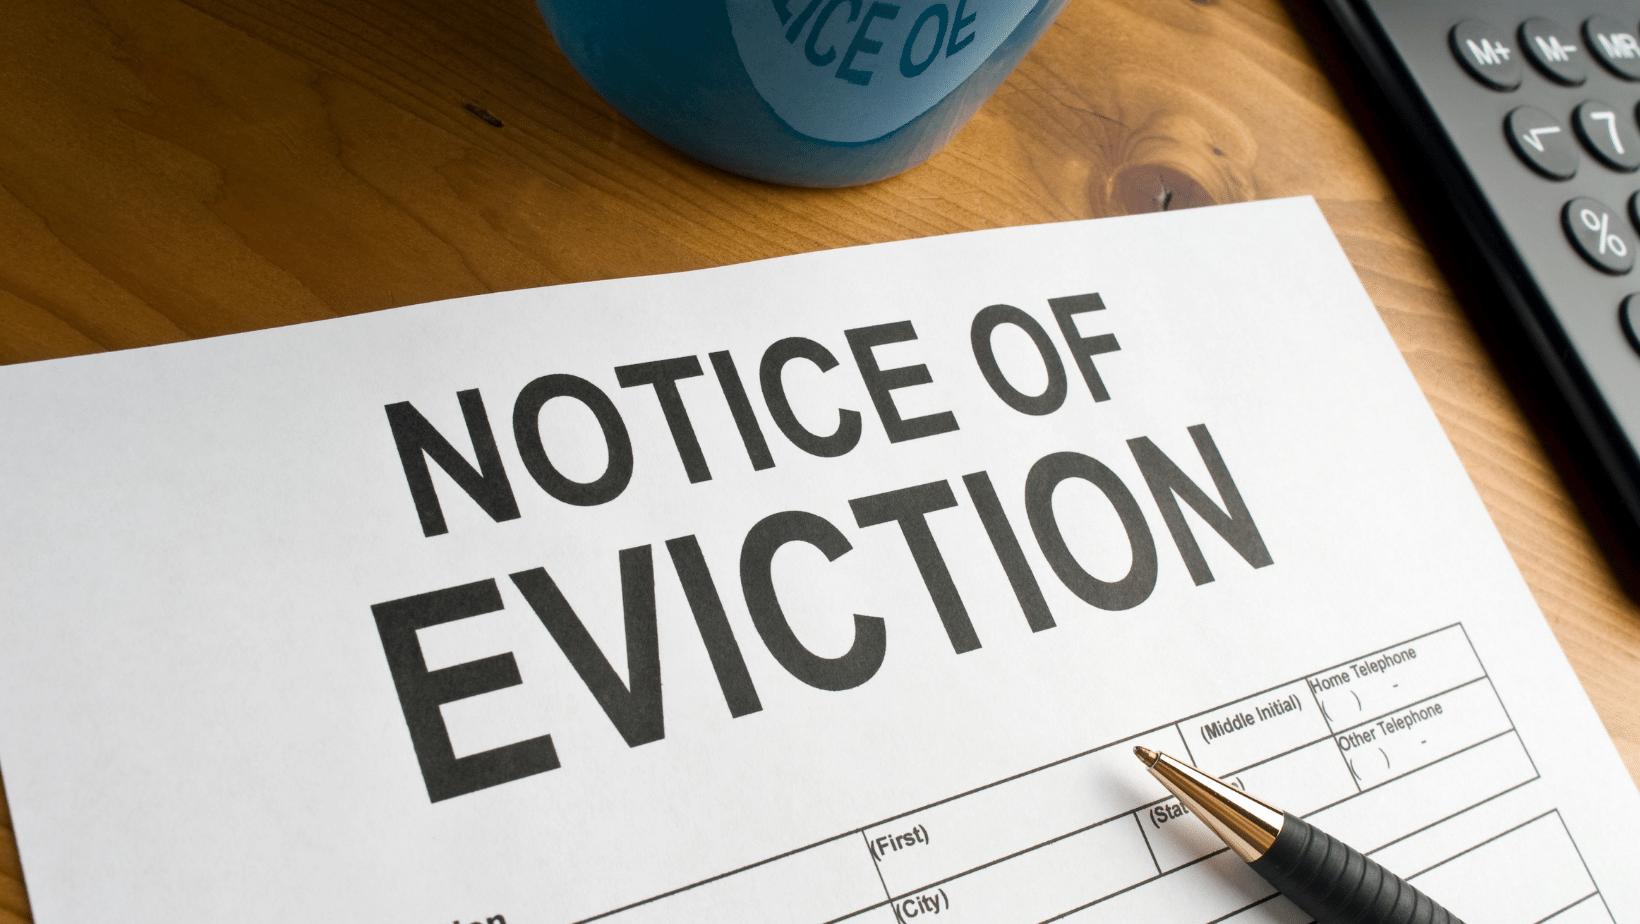 Real Estate Eviction 101 with Bruce Croskey Real Estate: How to Get Rid of Your Terrible Pittsburg Tenant